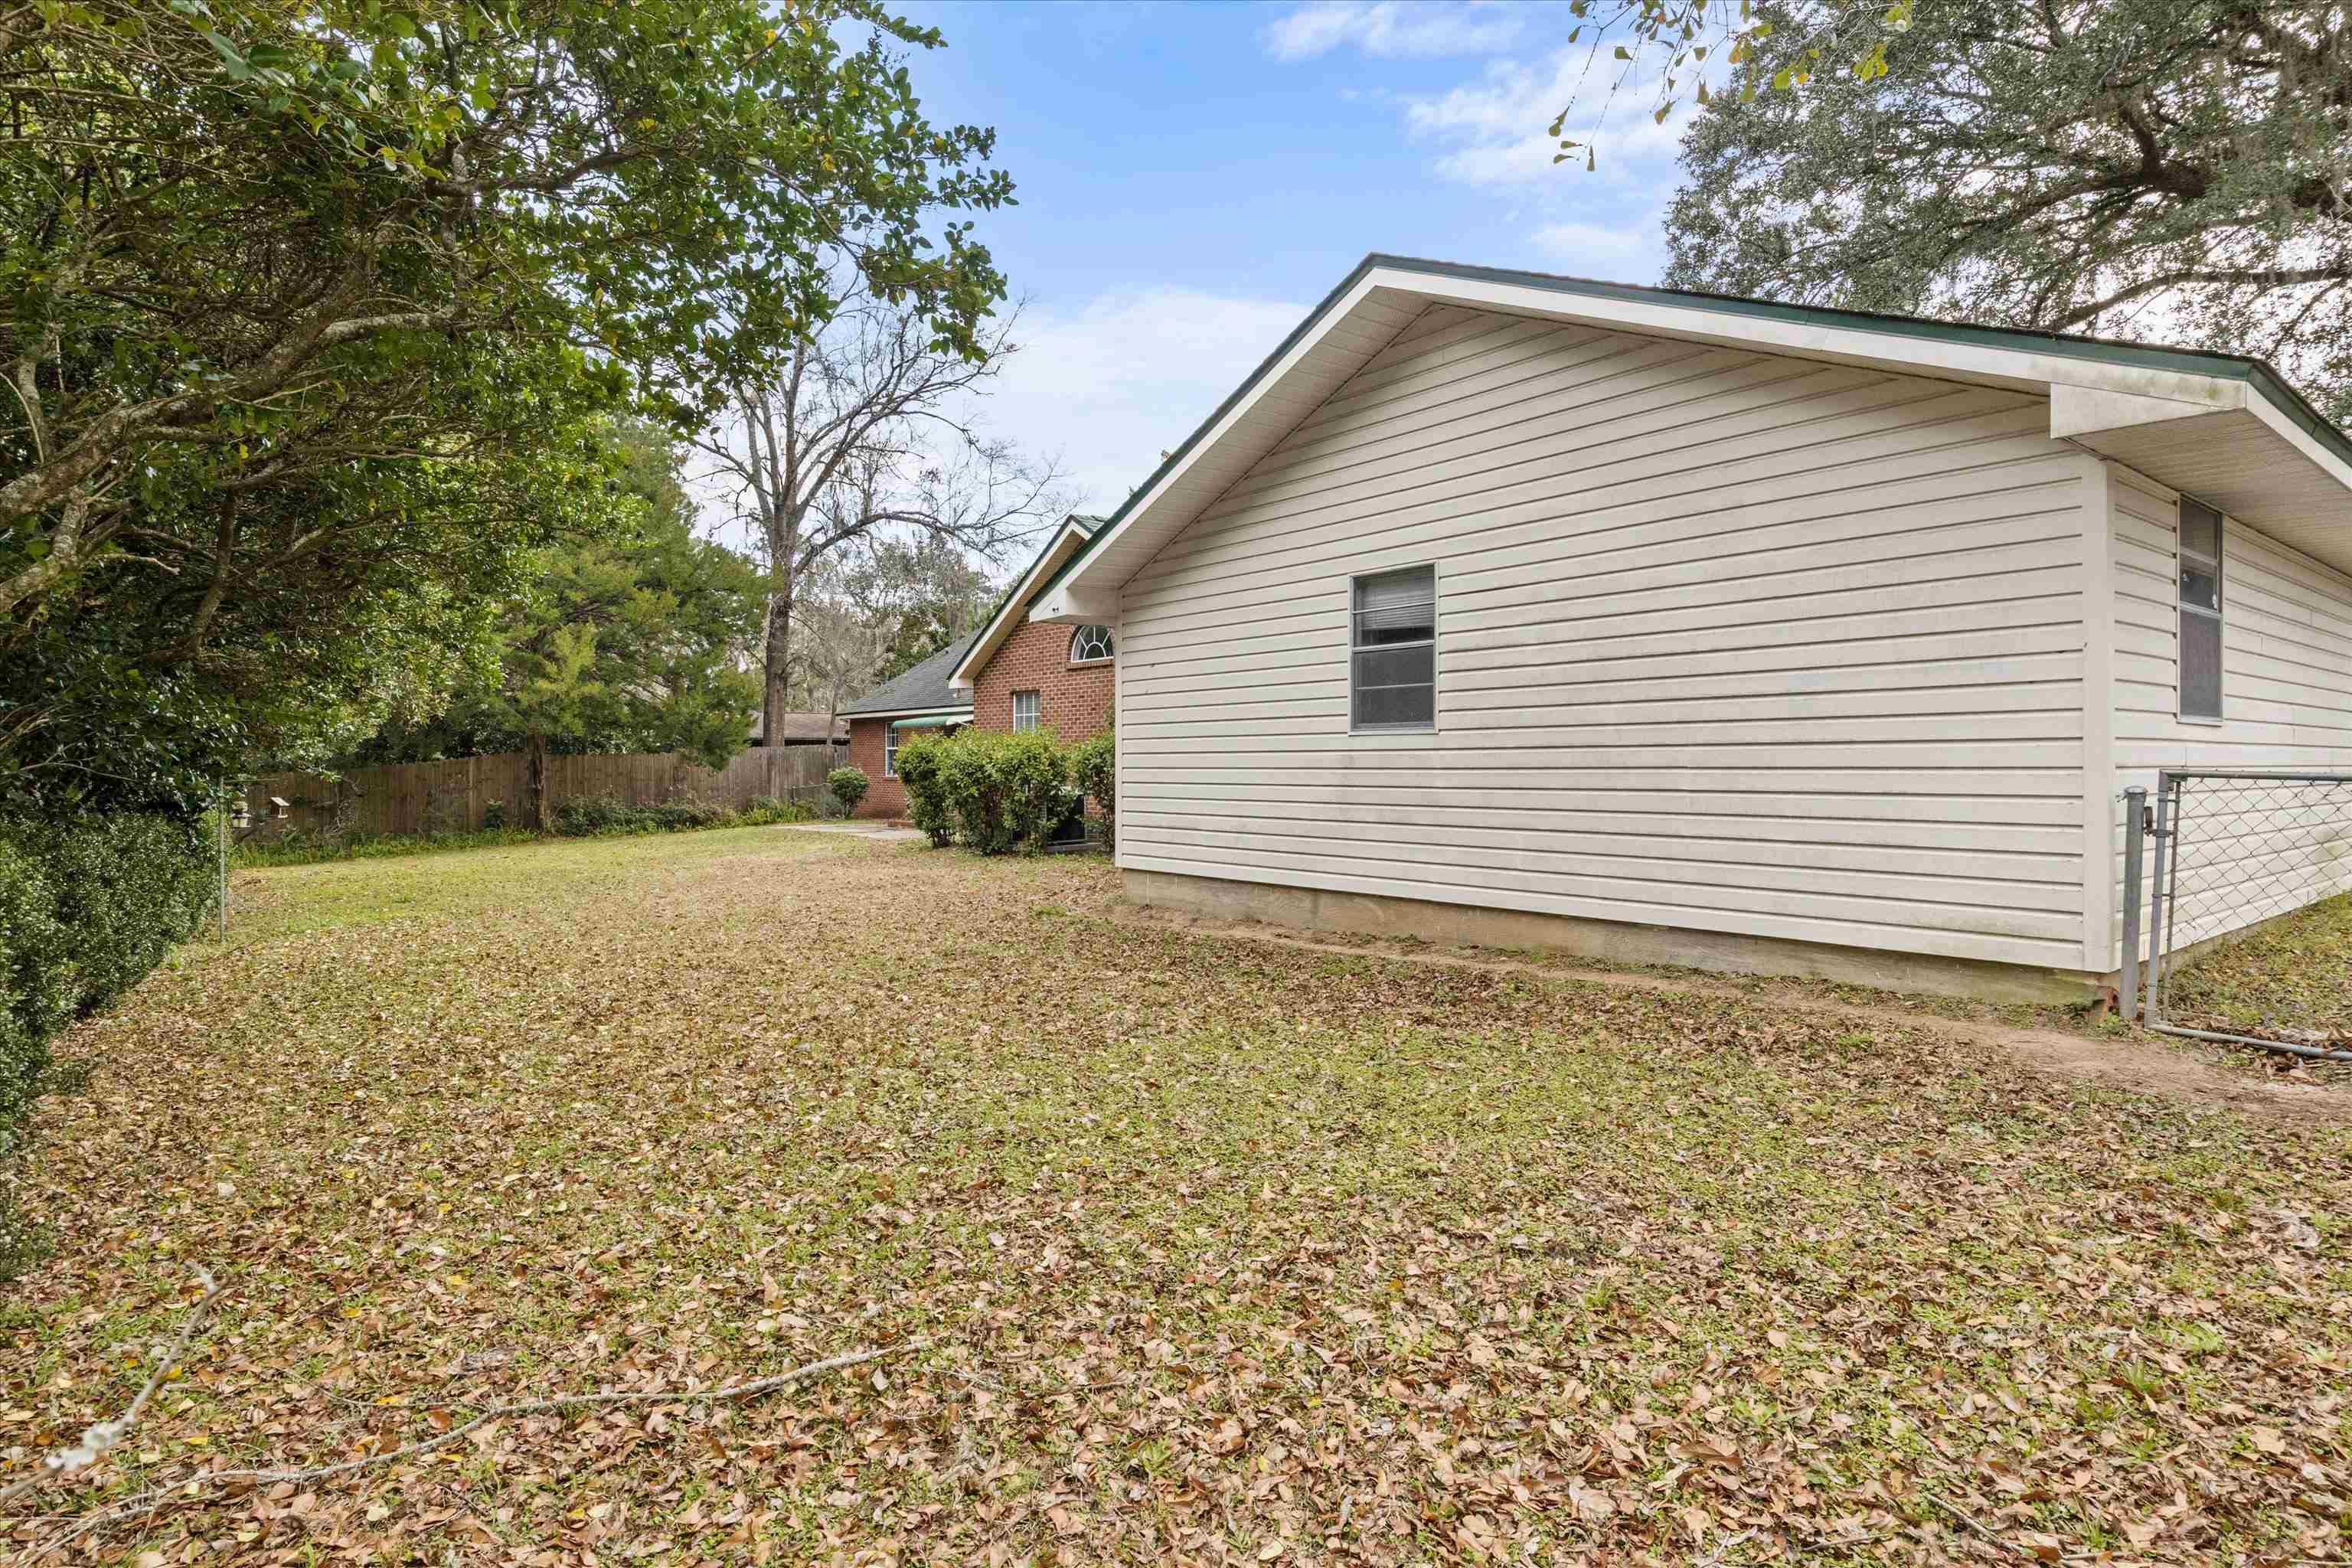 2102 Monticello Drive,TALLAHASSEE,Florida 32303,3 Bedrooms Bedrooms,2 BathroomsBathrooms,Detached single family,2102 Monticello Drive,368392